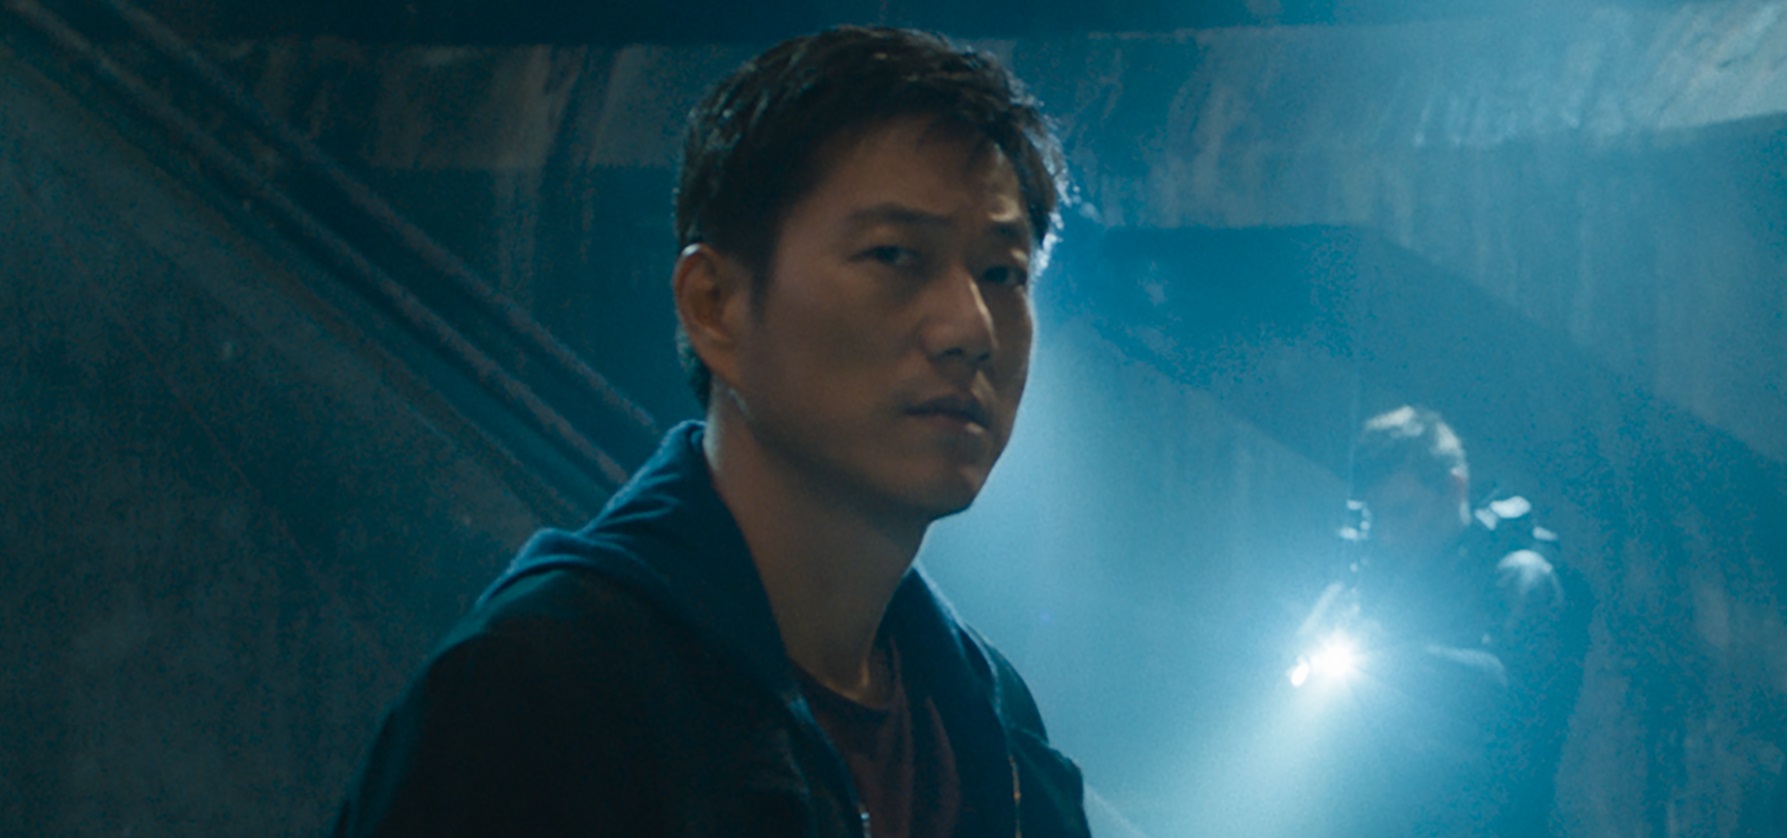 Sung Kang on the Return of Han in F9: The Fast Saga [Exclusive Interview]